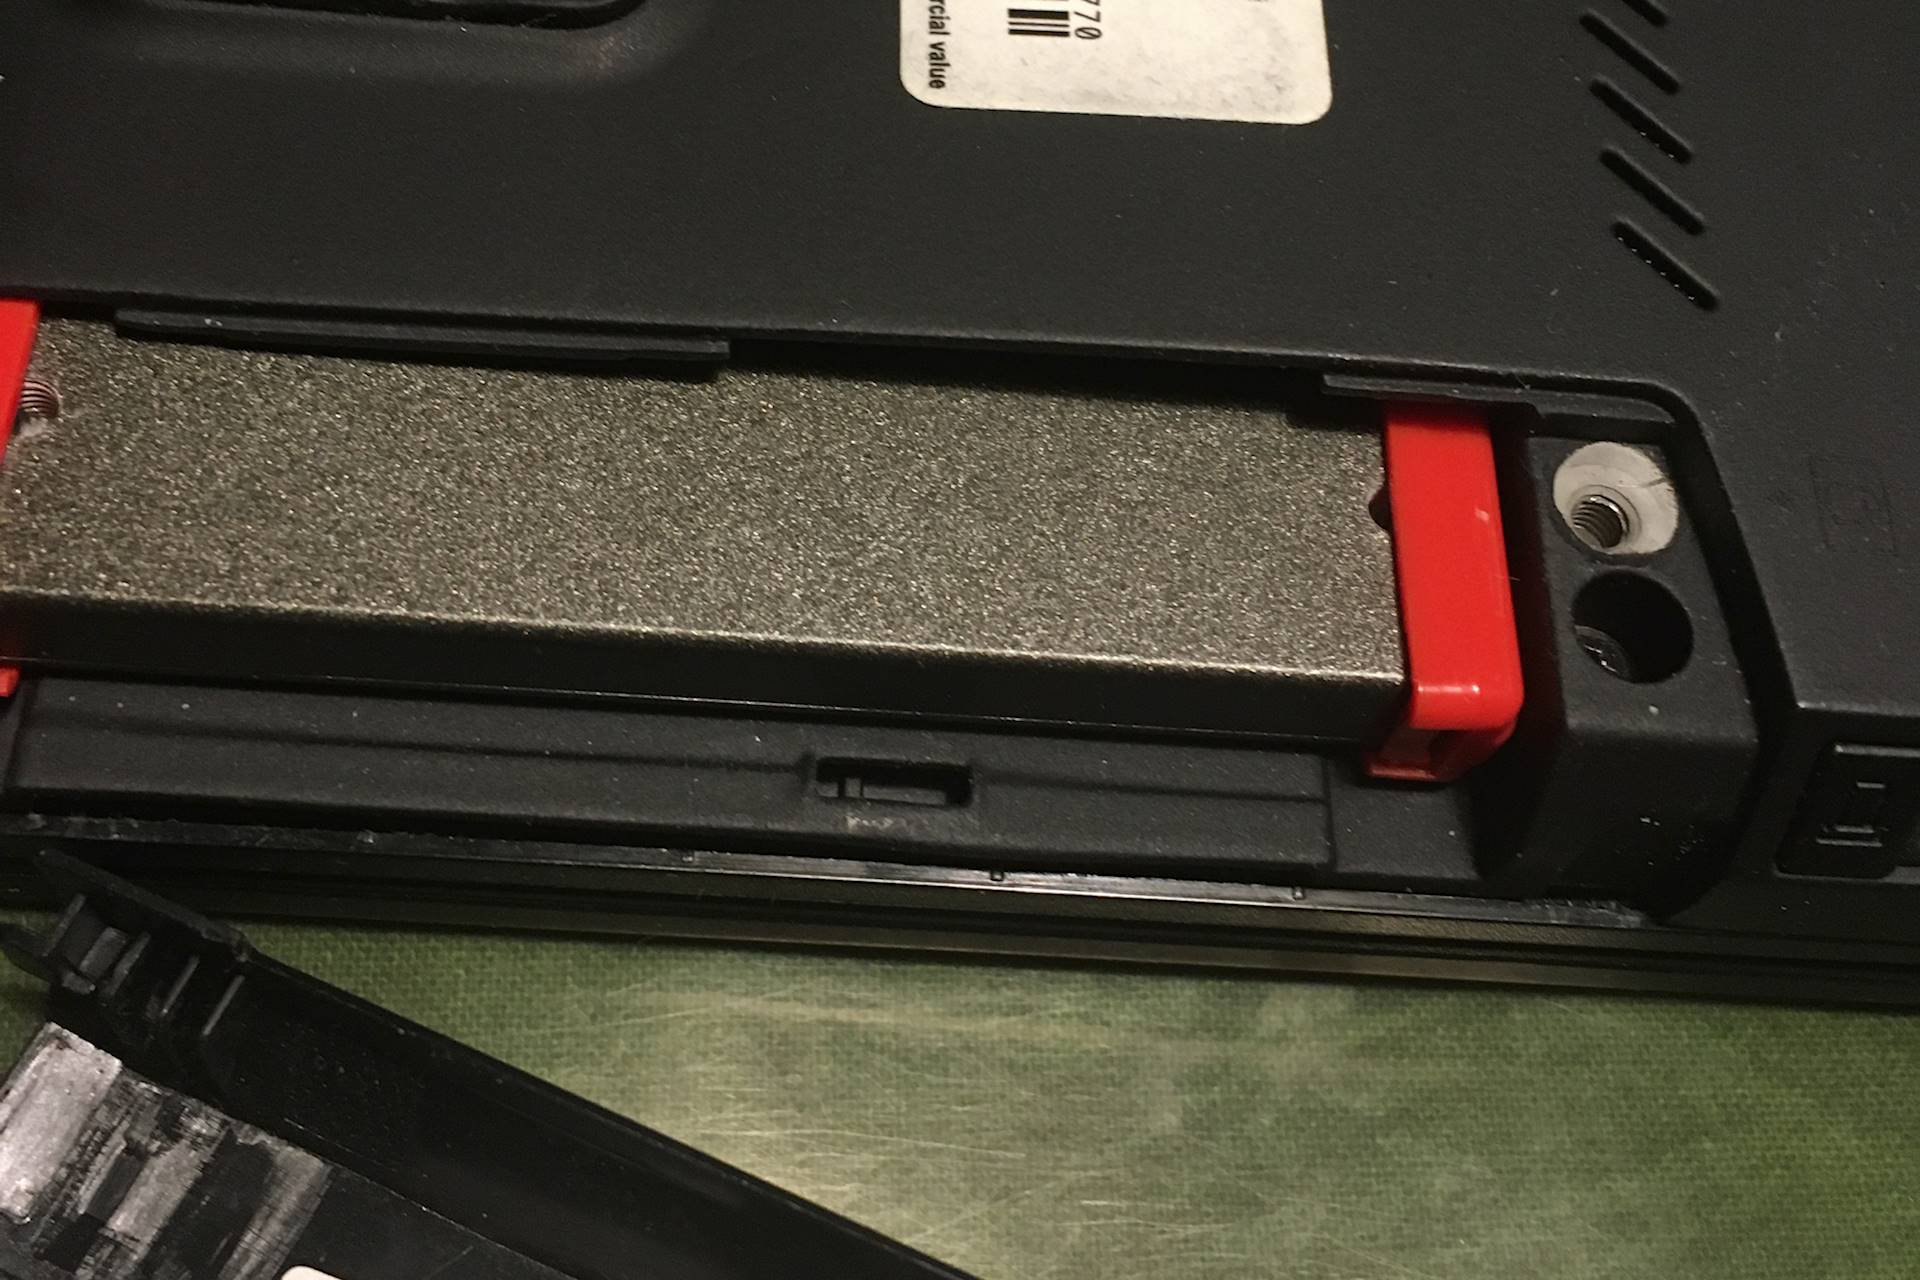 slot with the SSD inside